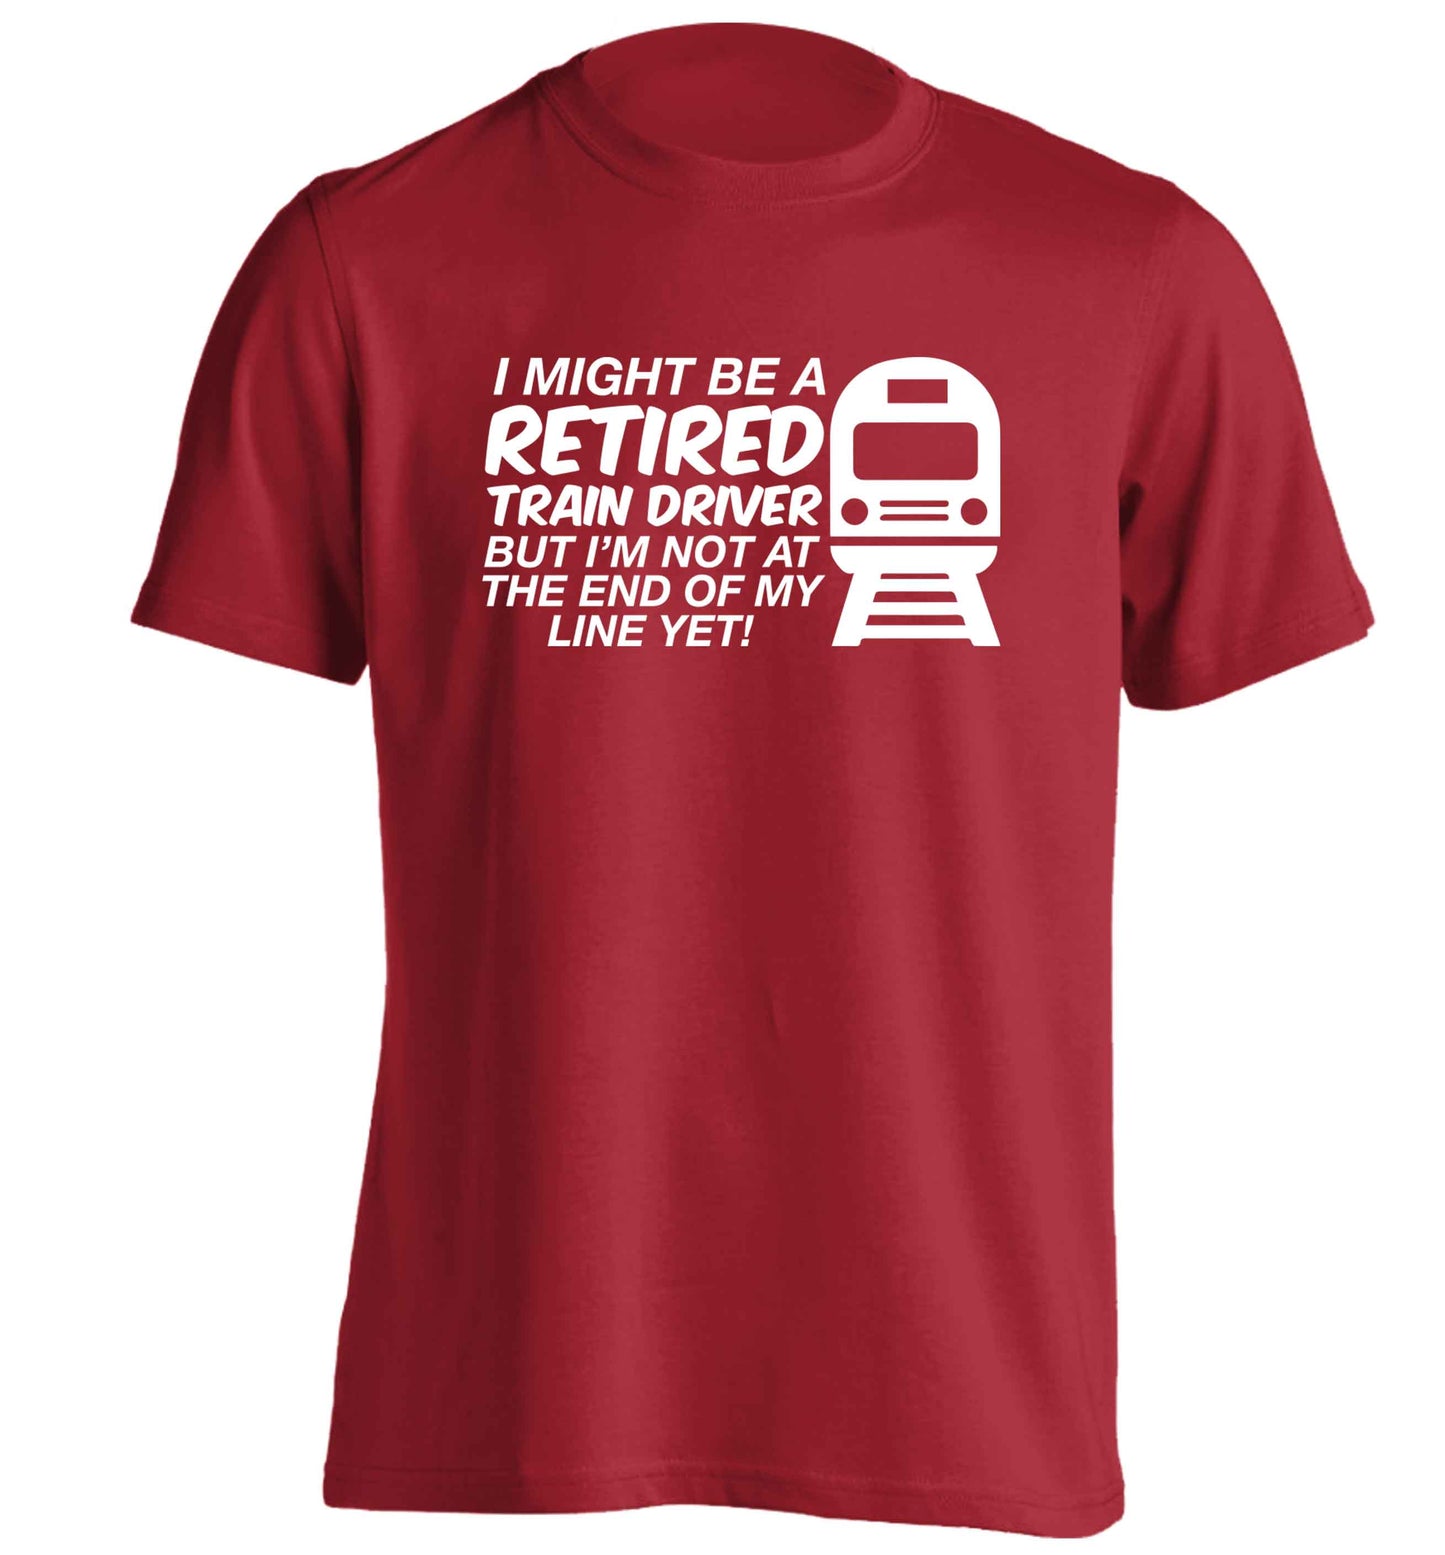 Retired train driver but I'm not at the end of my line yet adults unisex red Tshirt 2XL